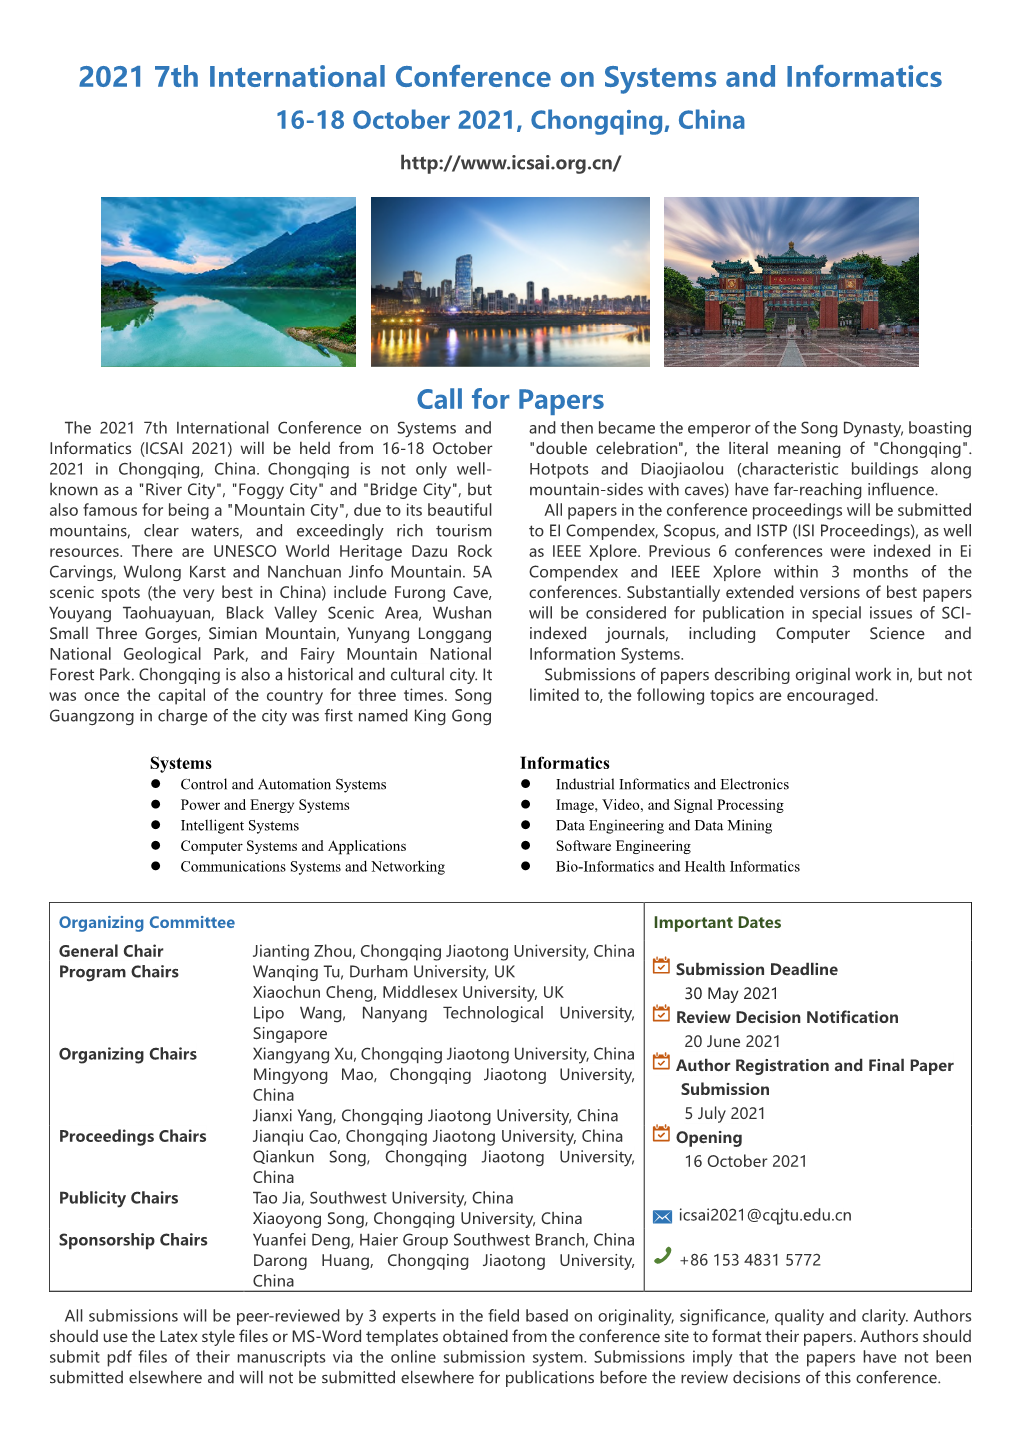 2021 7Th International Conference on Systems and Informatics 16-18 October 2021, Chongqing, China